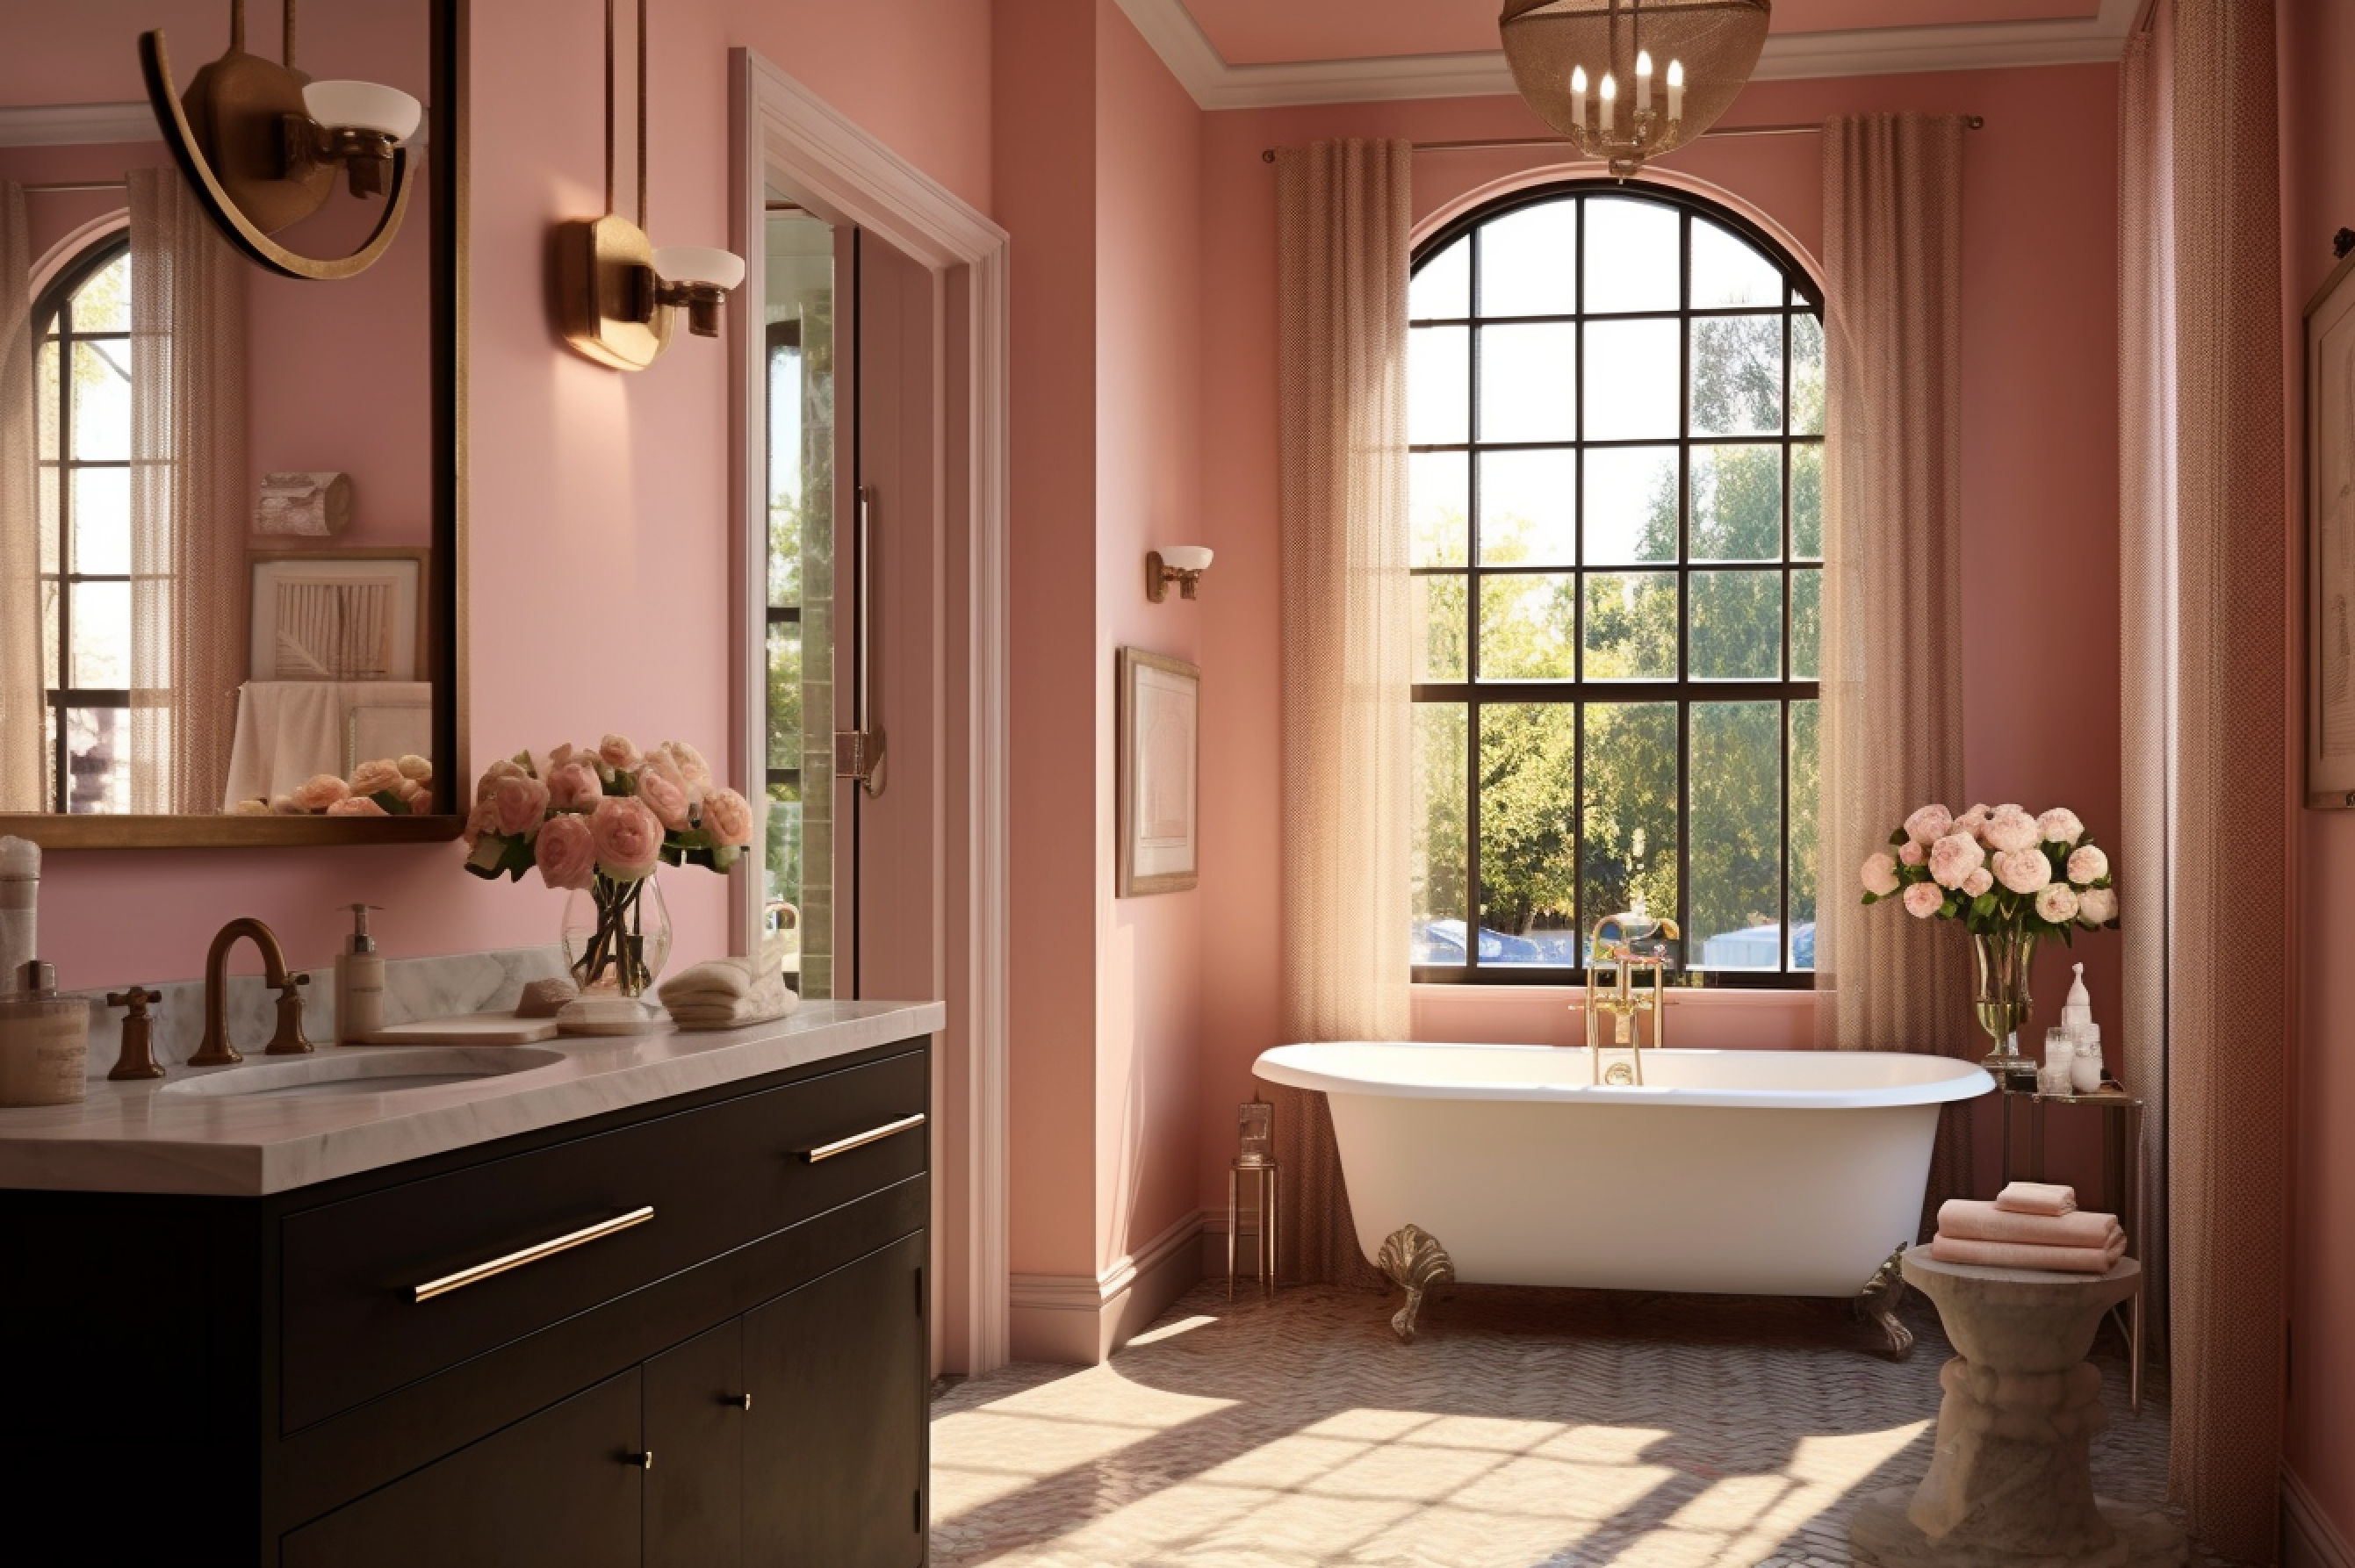 Snapshot of a glamorous bathroom featuring a dark brown vanity and pastel pink painted walls.